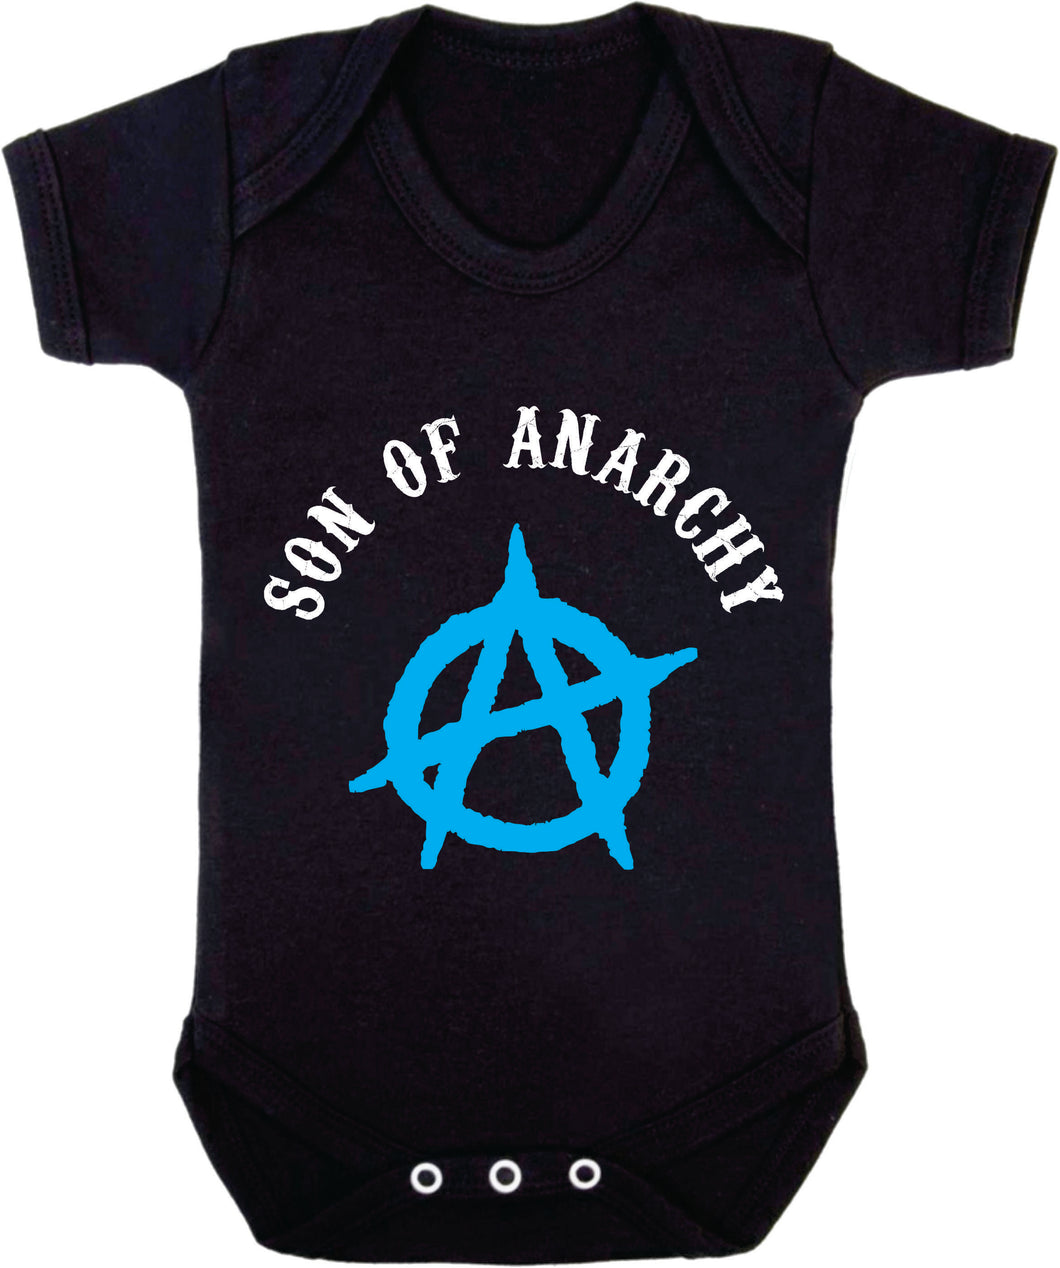 BABY: Son of Anarchy